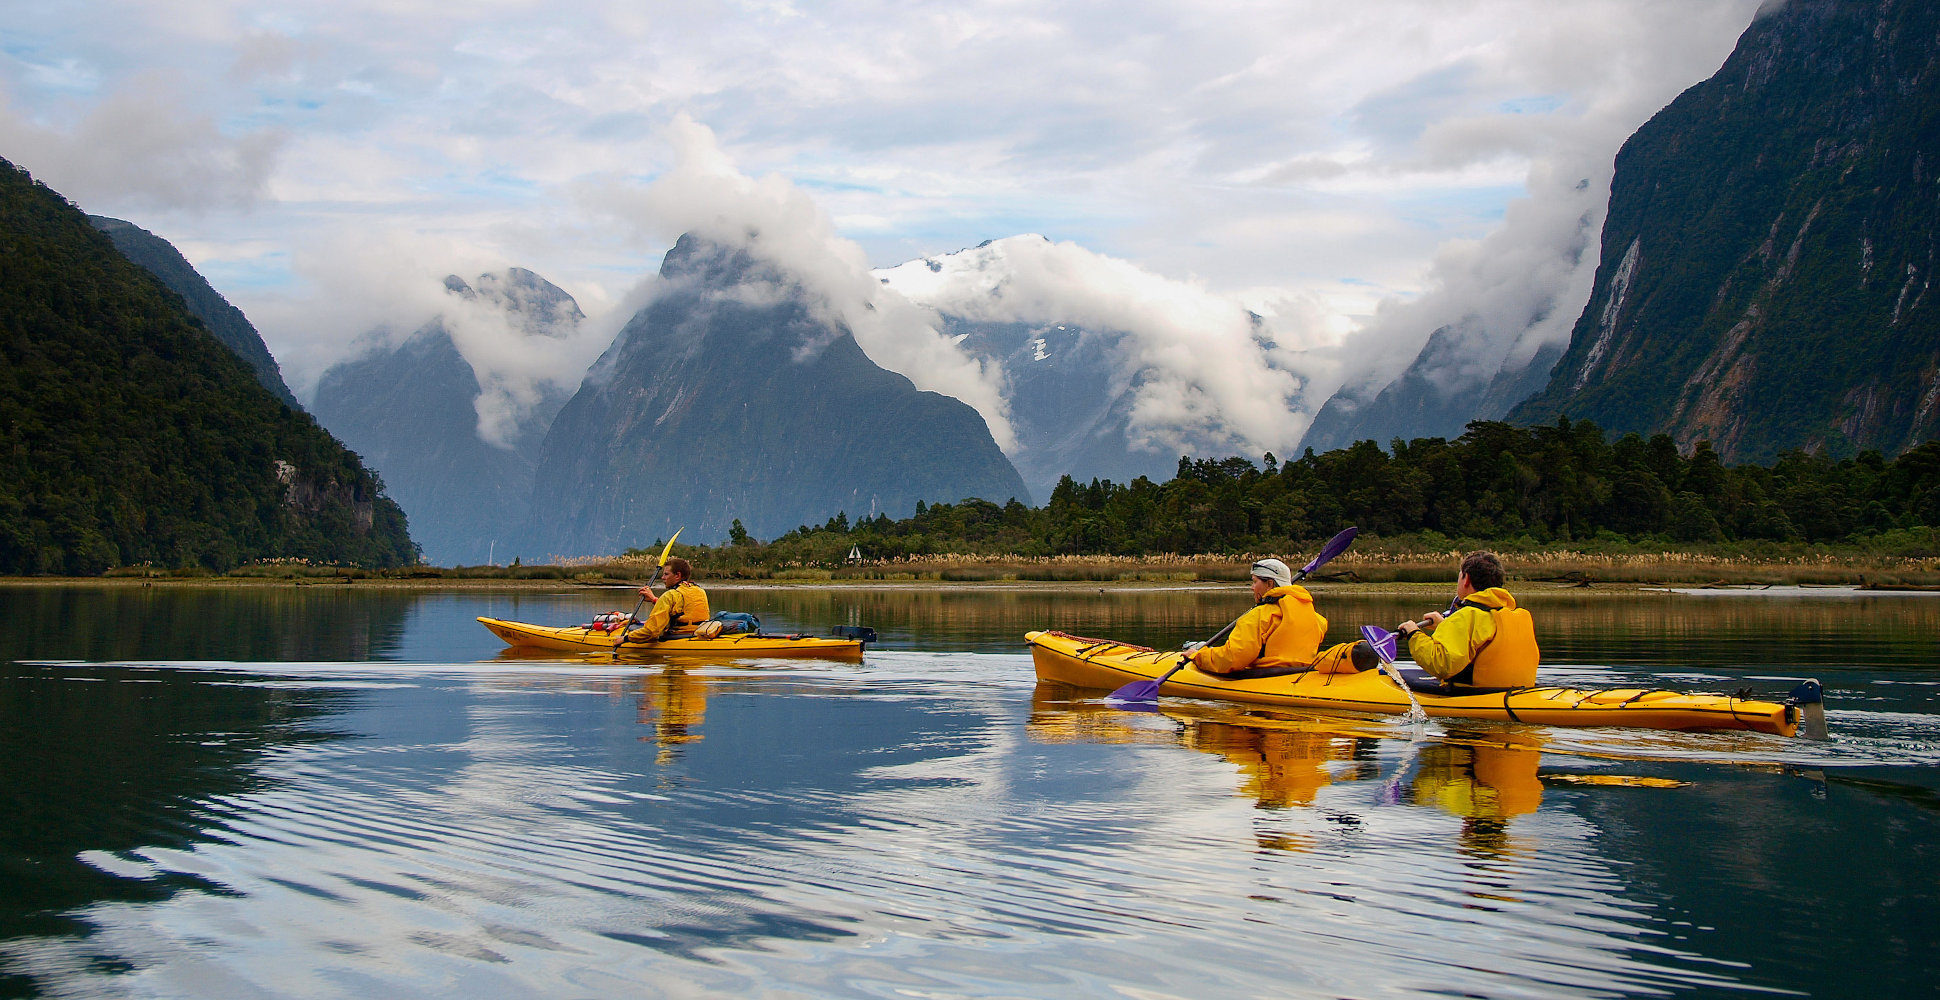 Kayaking in the Milford Sound